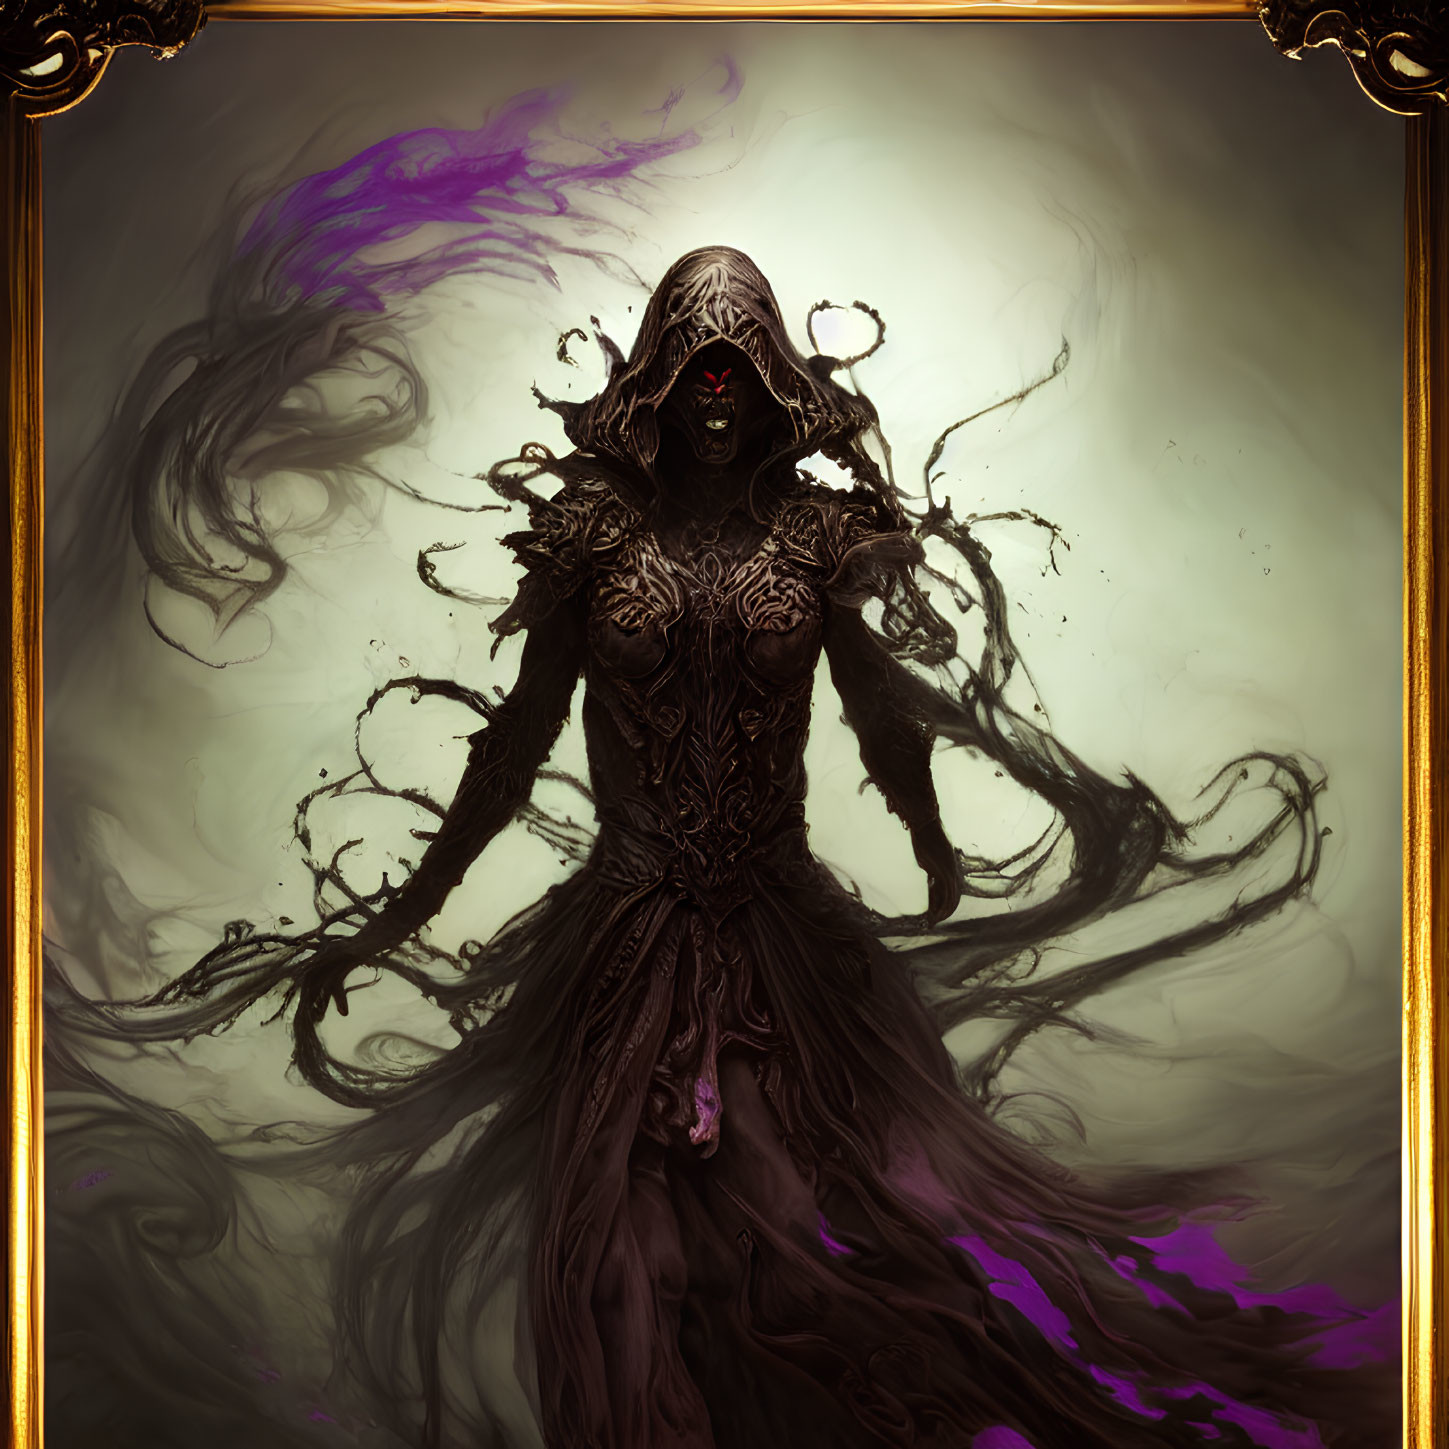 Hooded figure with glowing red eyes in ornate golden frame